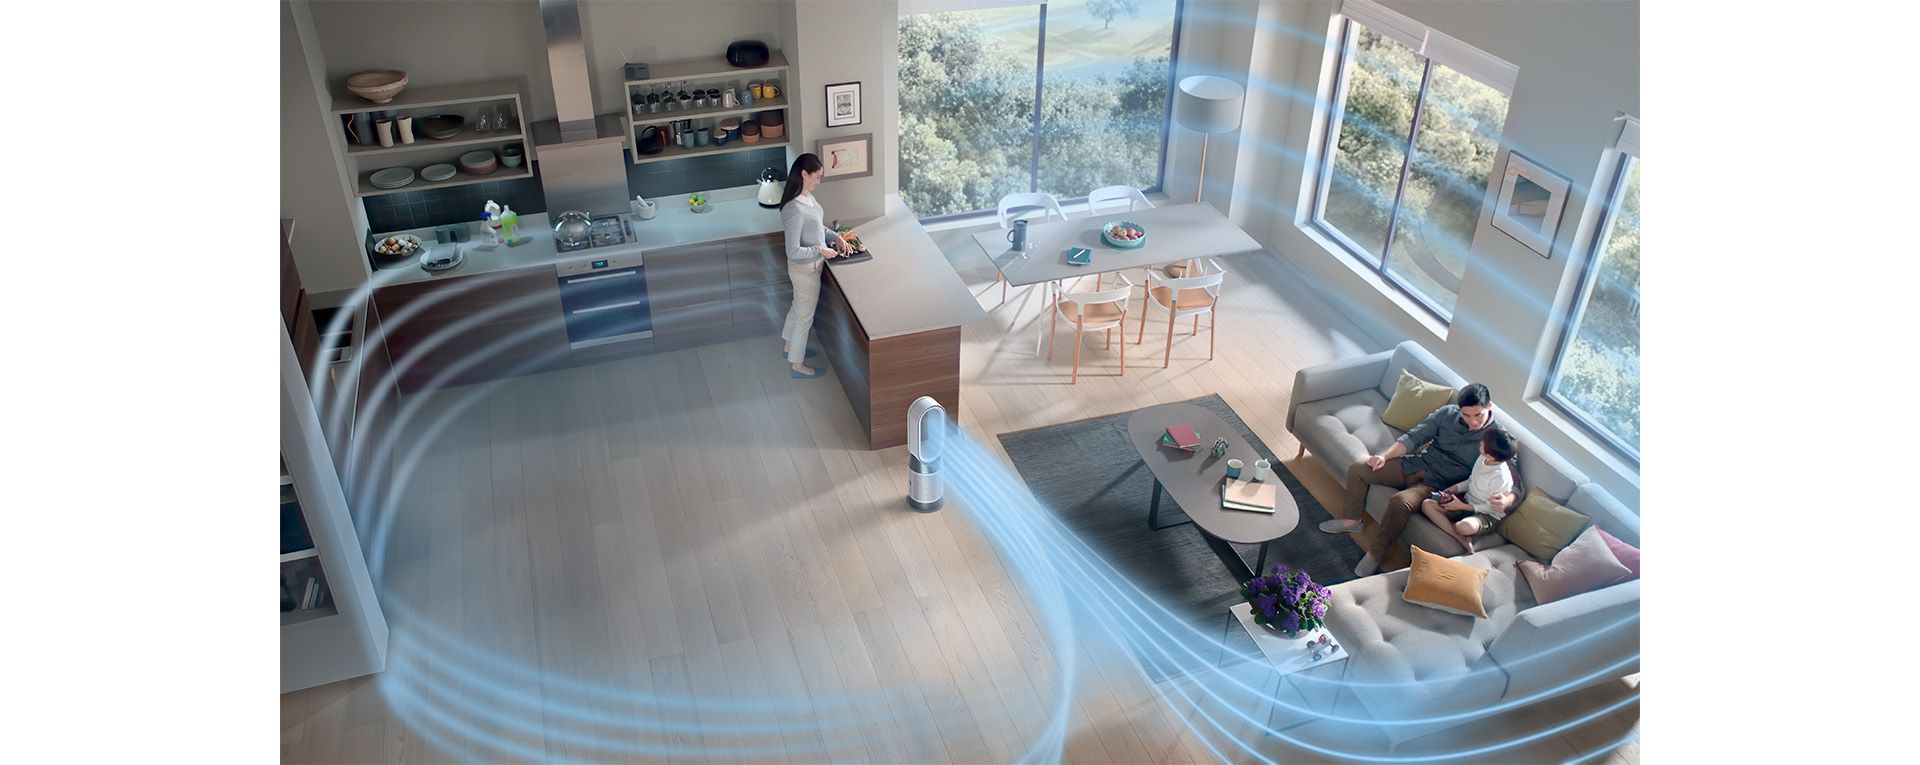 The Dyson Purifier Hot+Cool Gen1 purifying a living space.